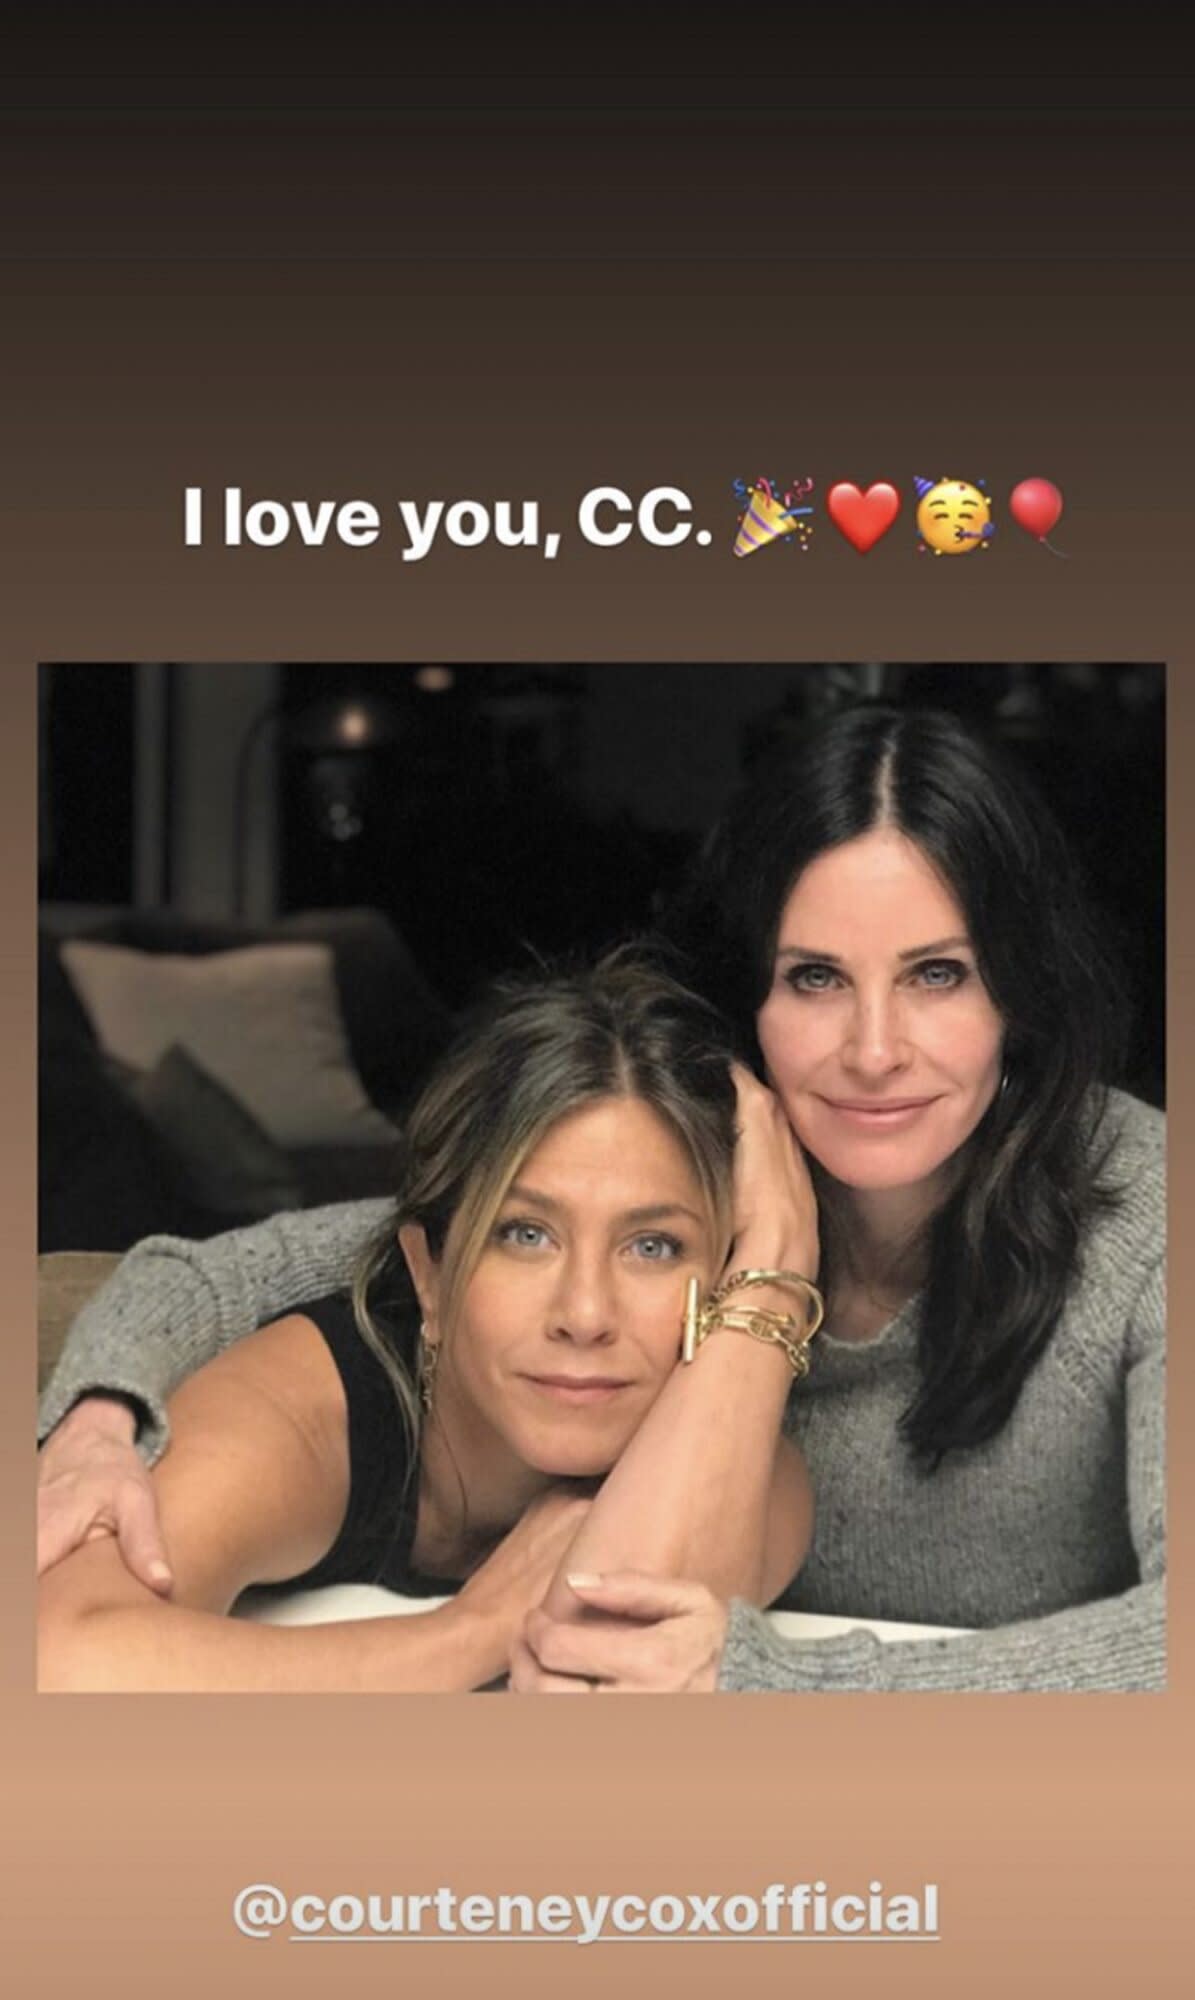 Courteney Cox And Jennifer Aniston Wear Masks While Cuddling Up With 